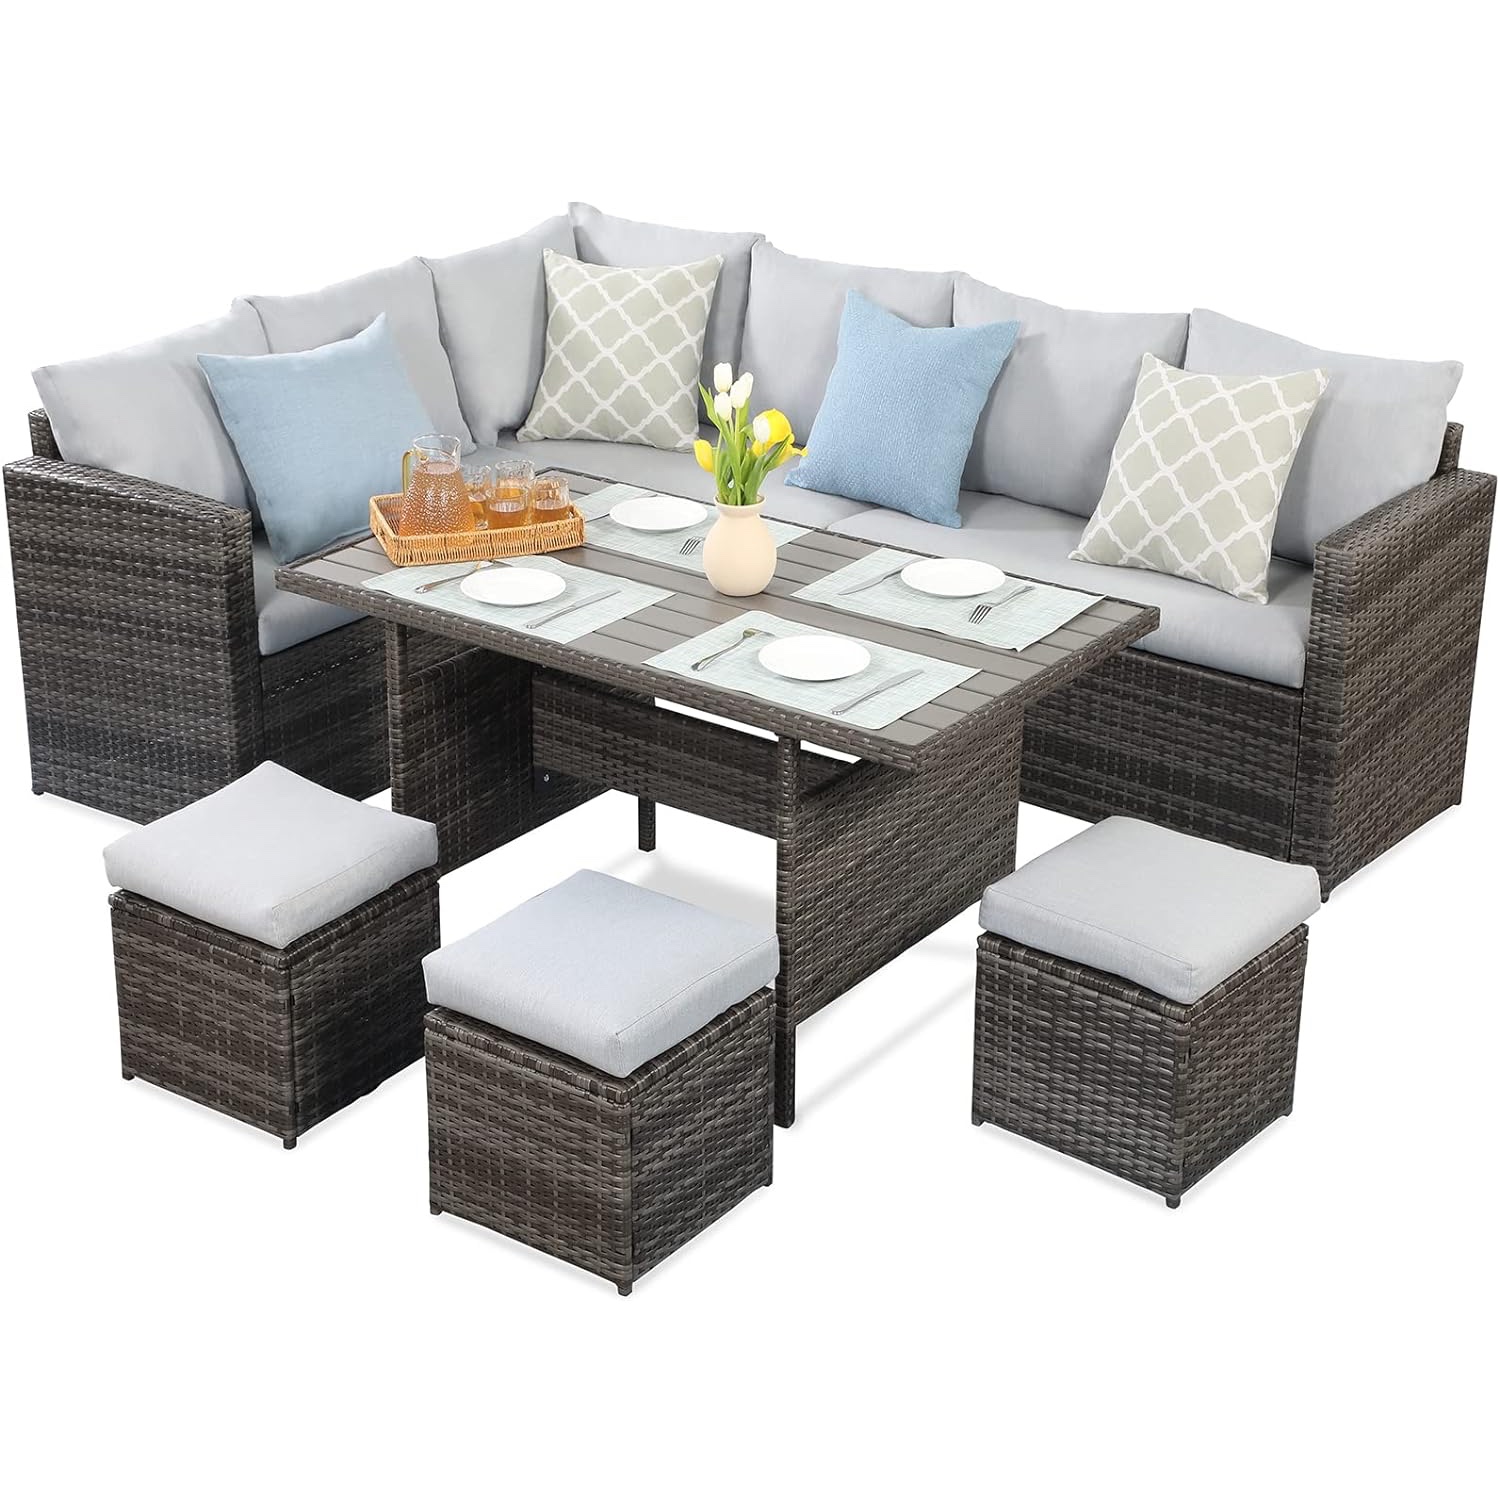 Wisteria Lane 7-Piece Outdoor Dining Table & Ottoman